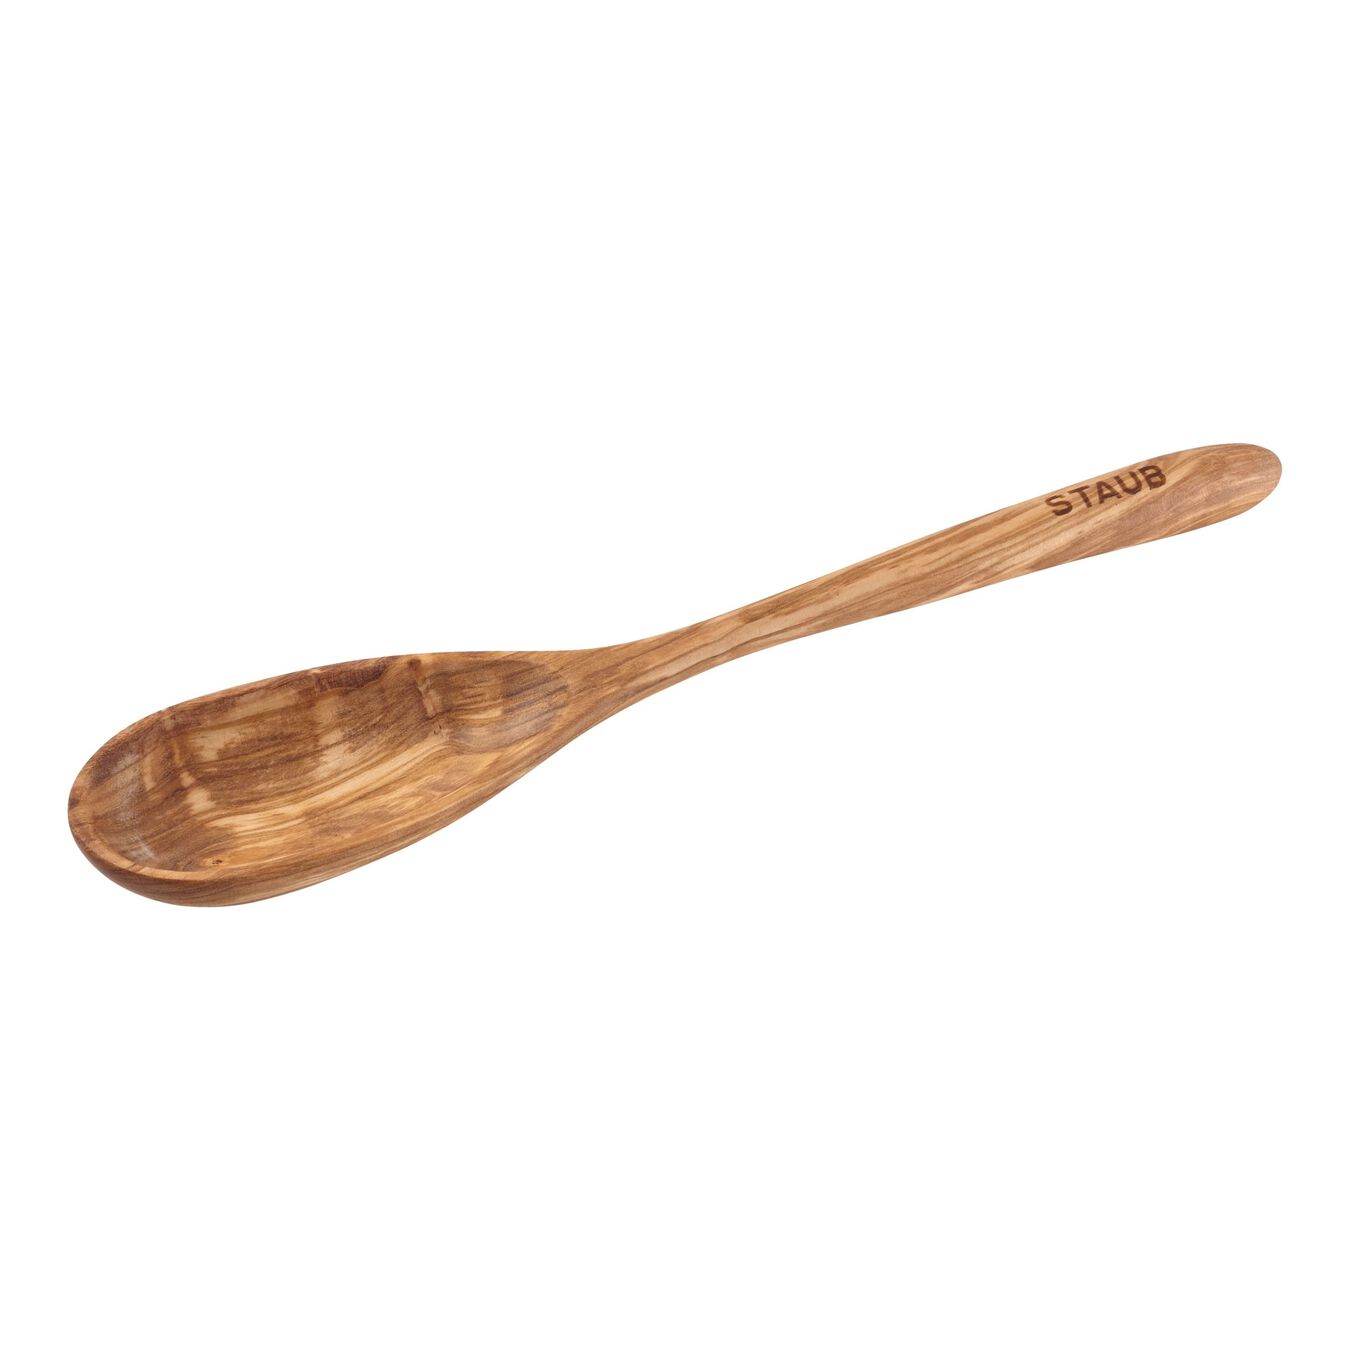 Wooden large spoon Olive Wood Big Spoon 9 Inch Mom Gift Kitchen gift